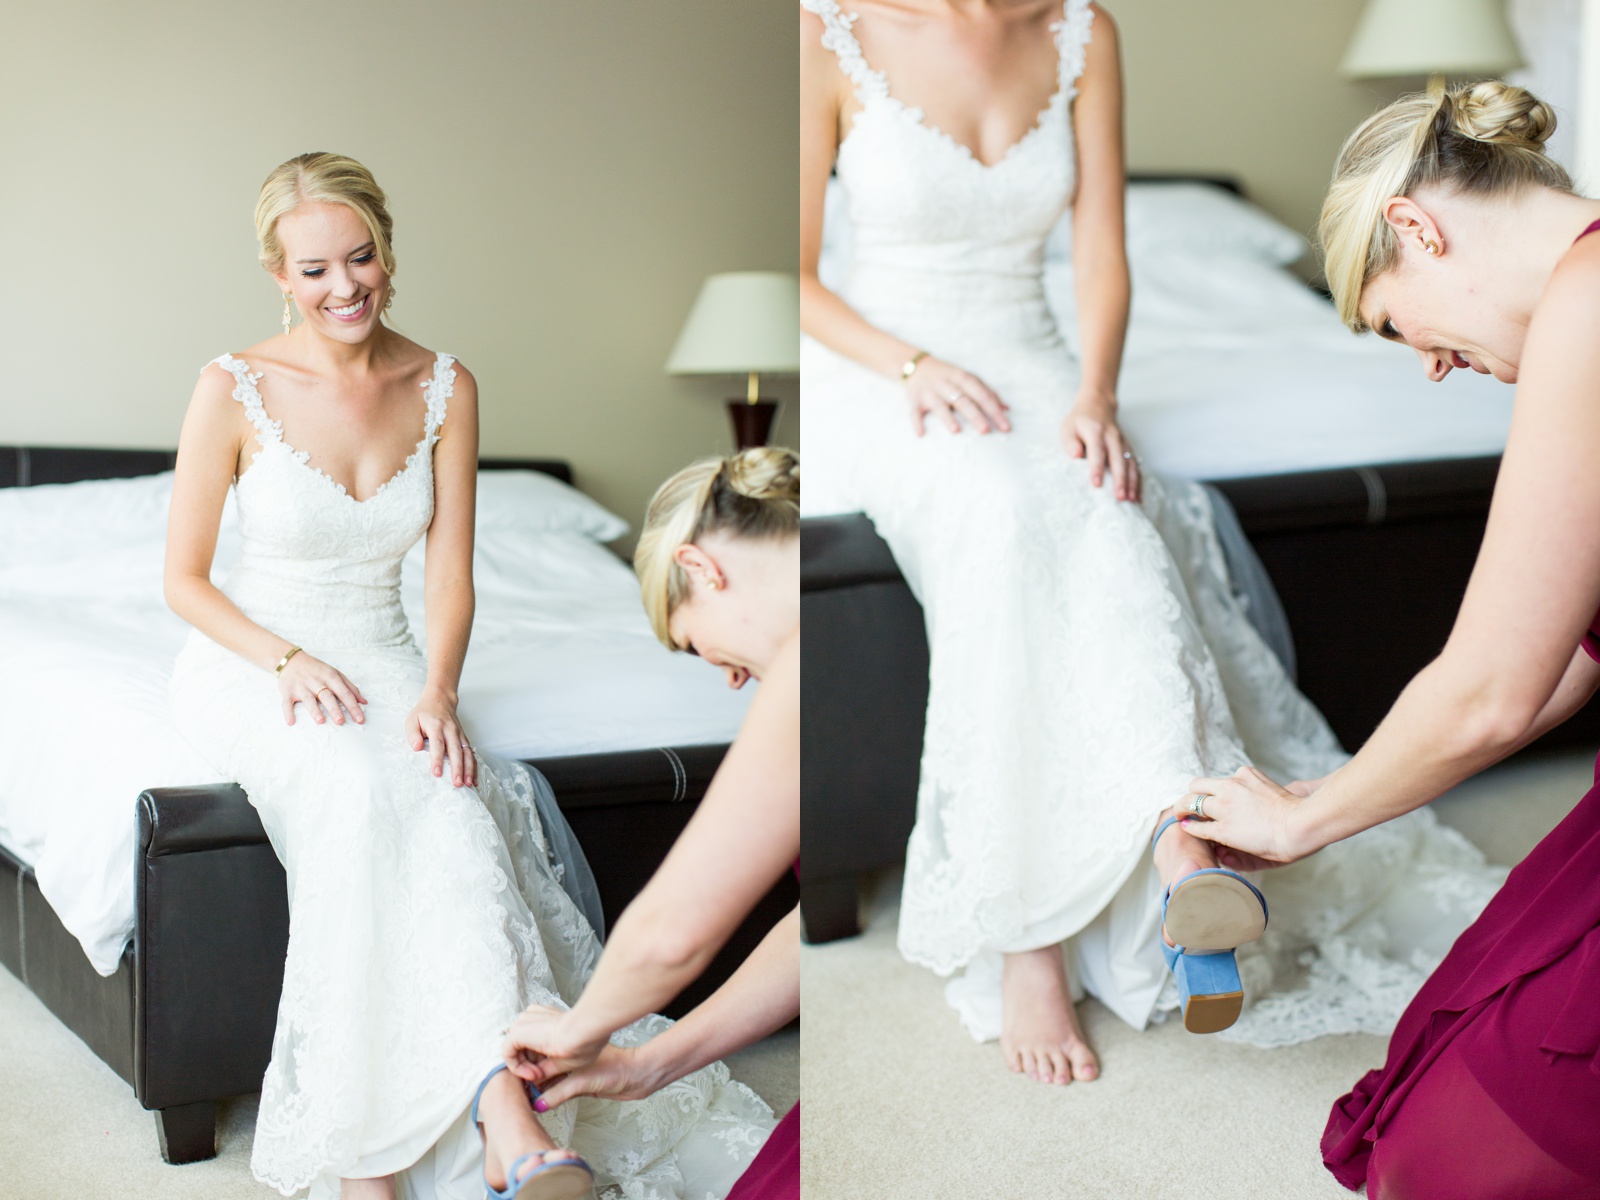 Bride getting ready with her bridesmaids. Having help putting on her shoes.